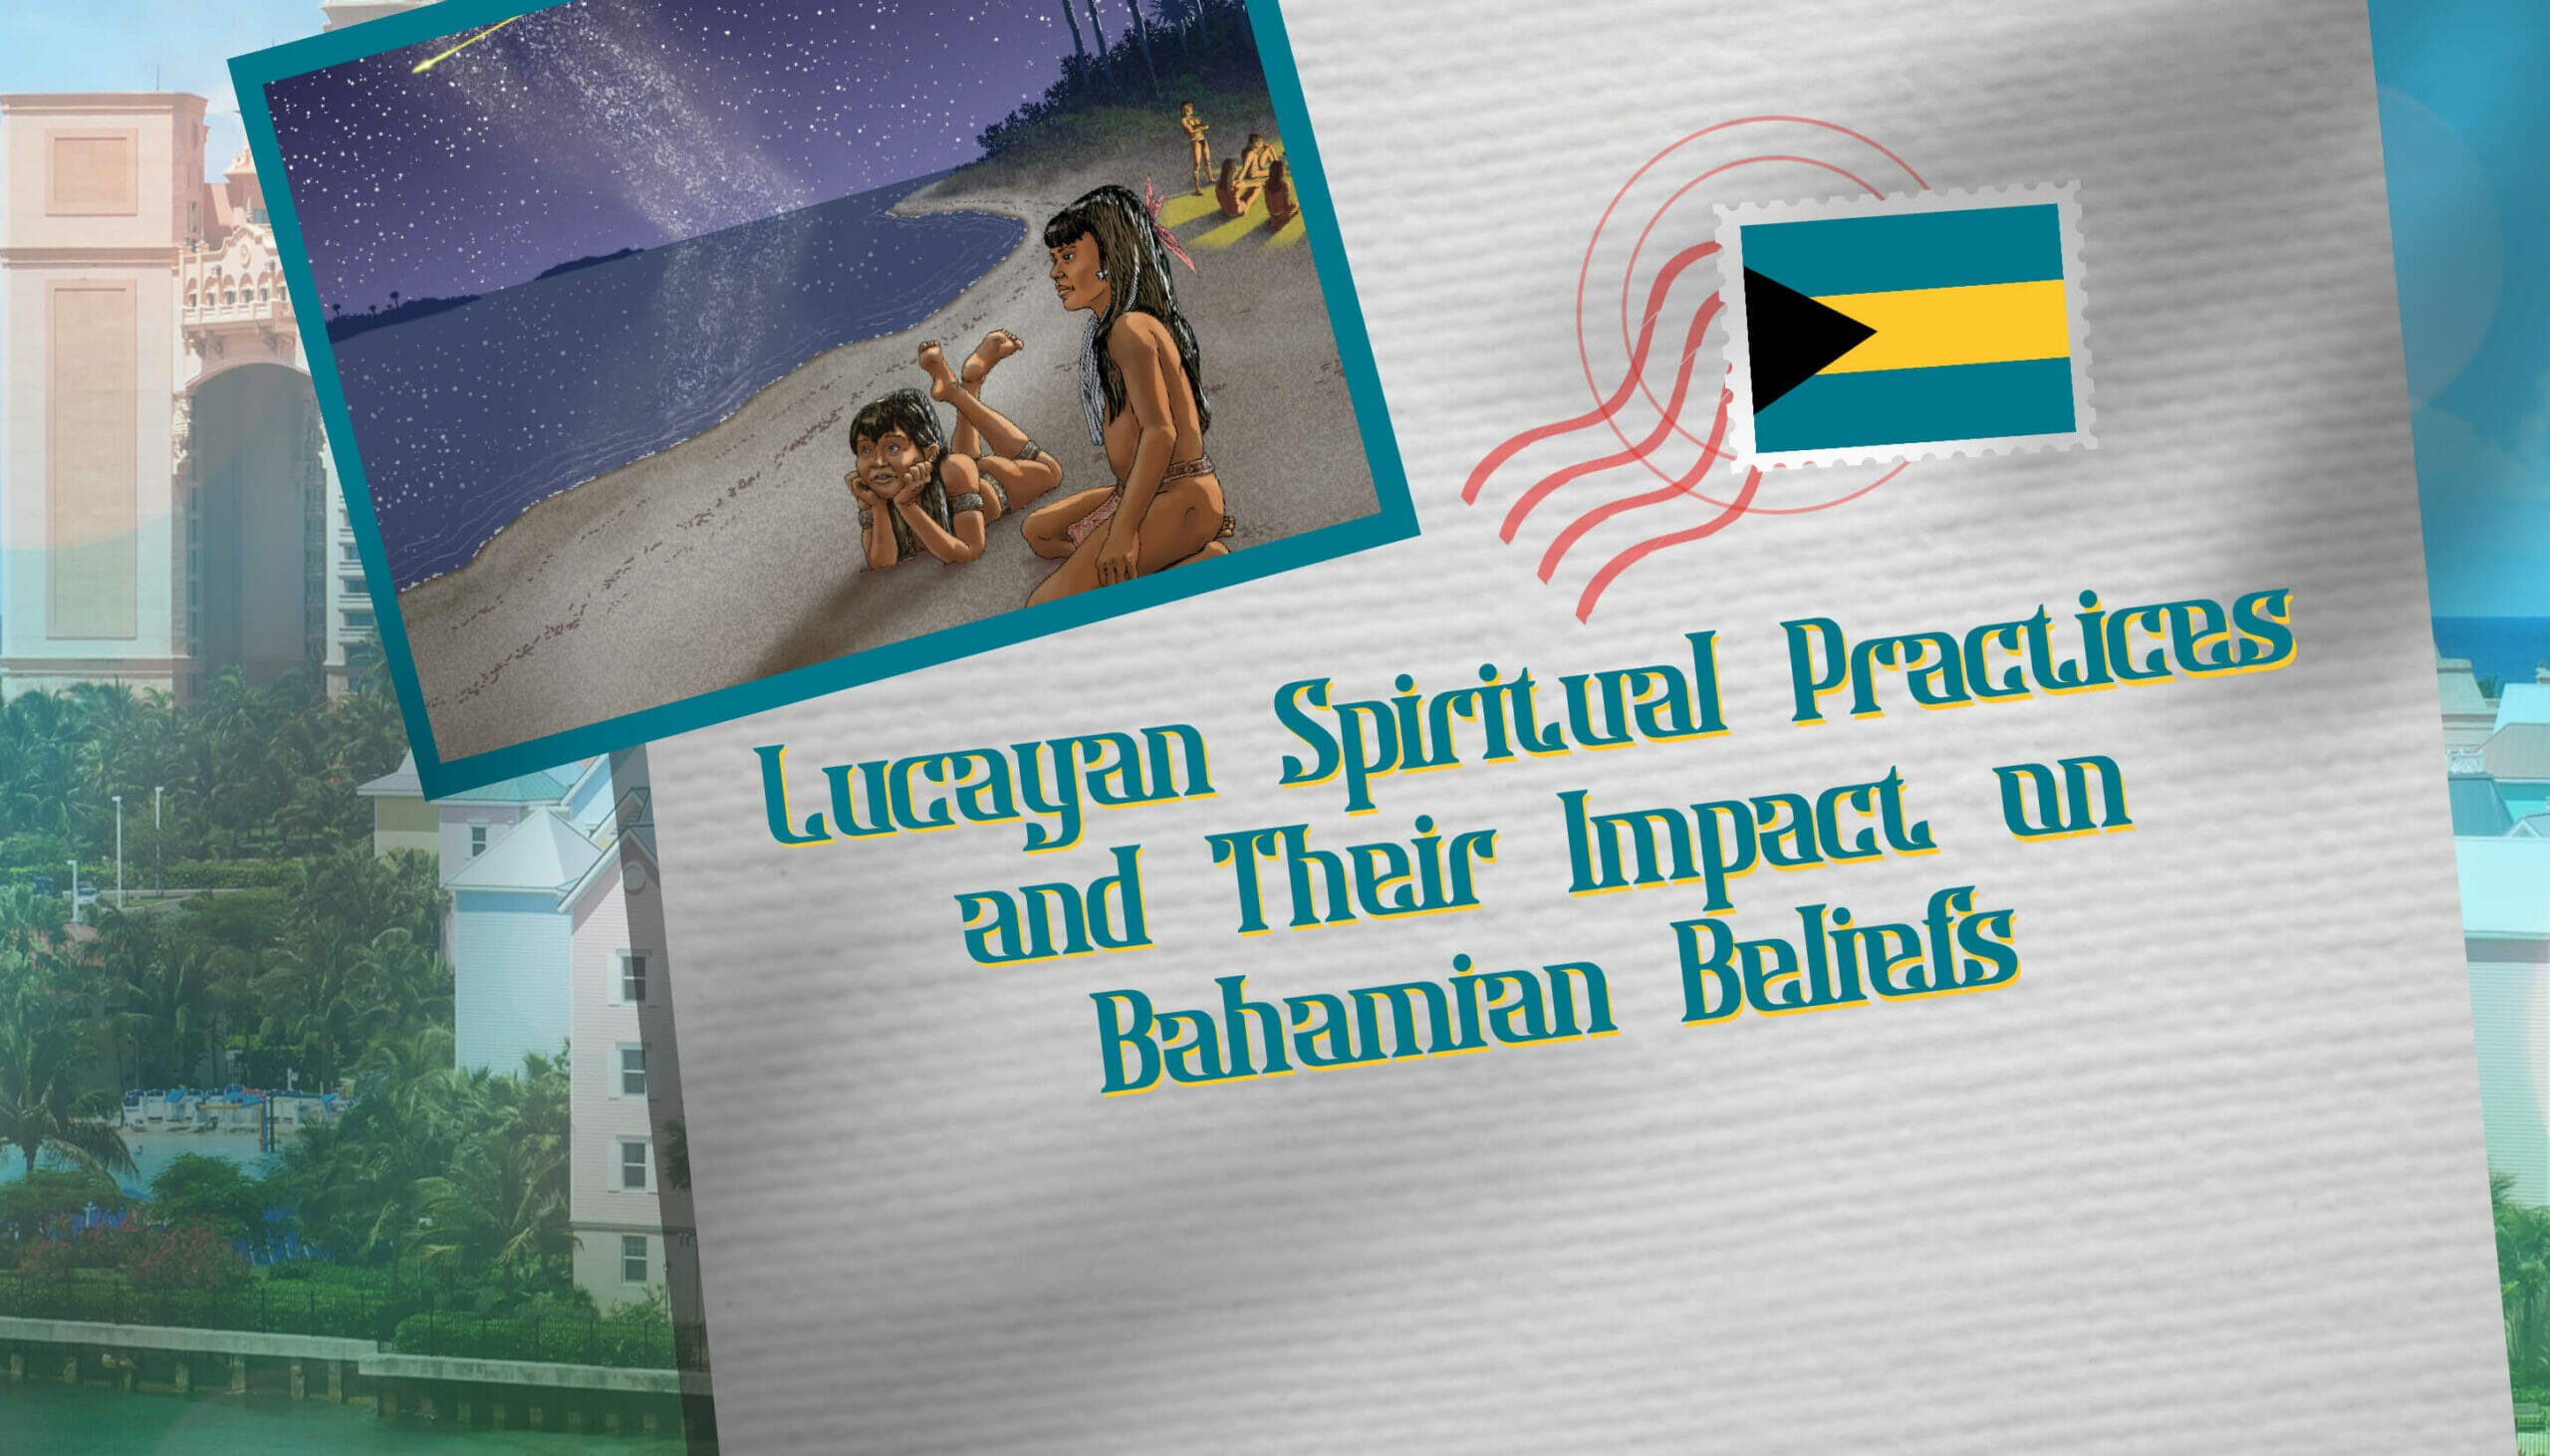 Lucayan Spiritual Practices and Their Impact on Bahamian Beliefs